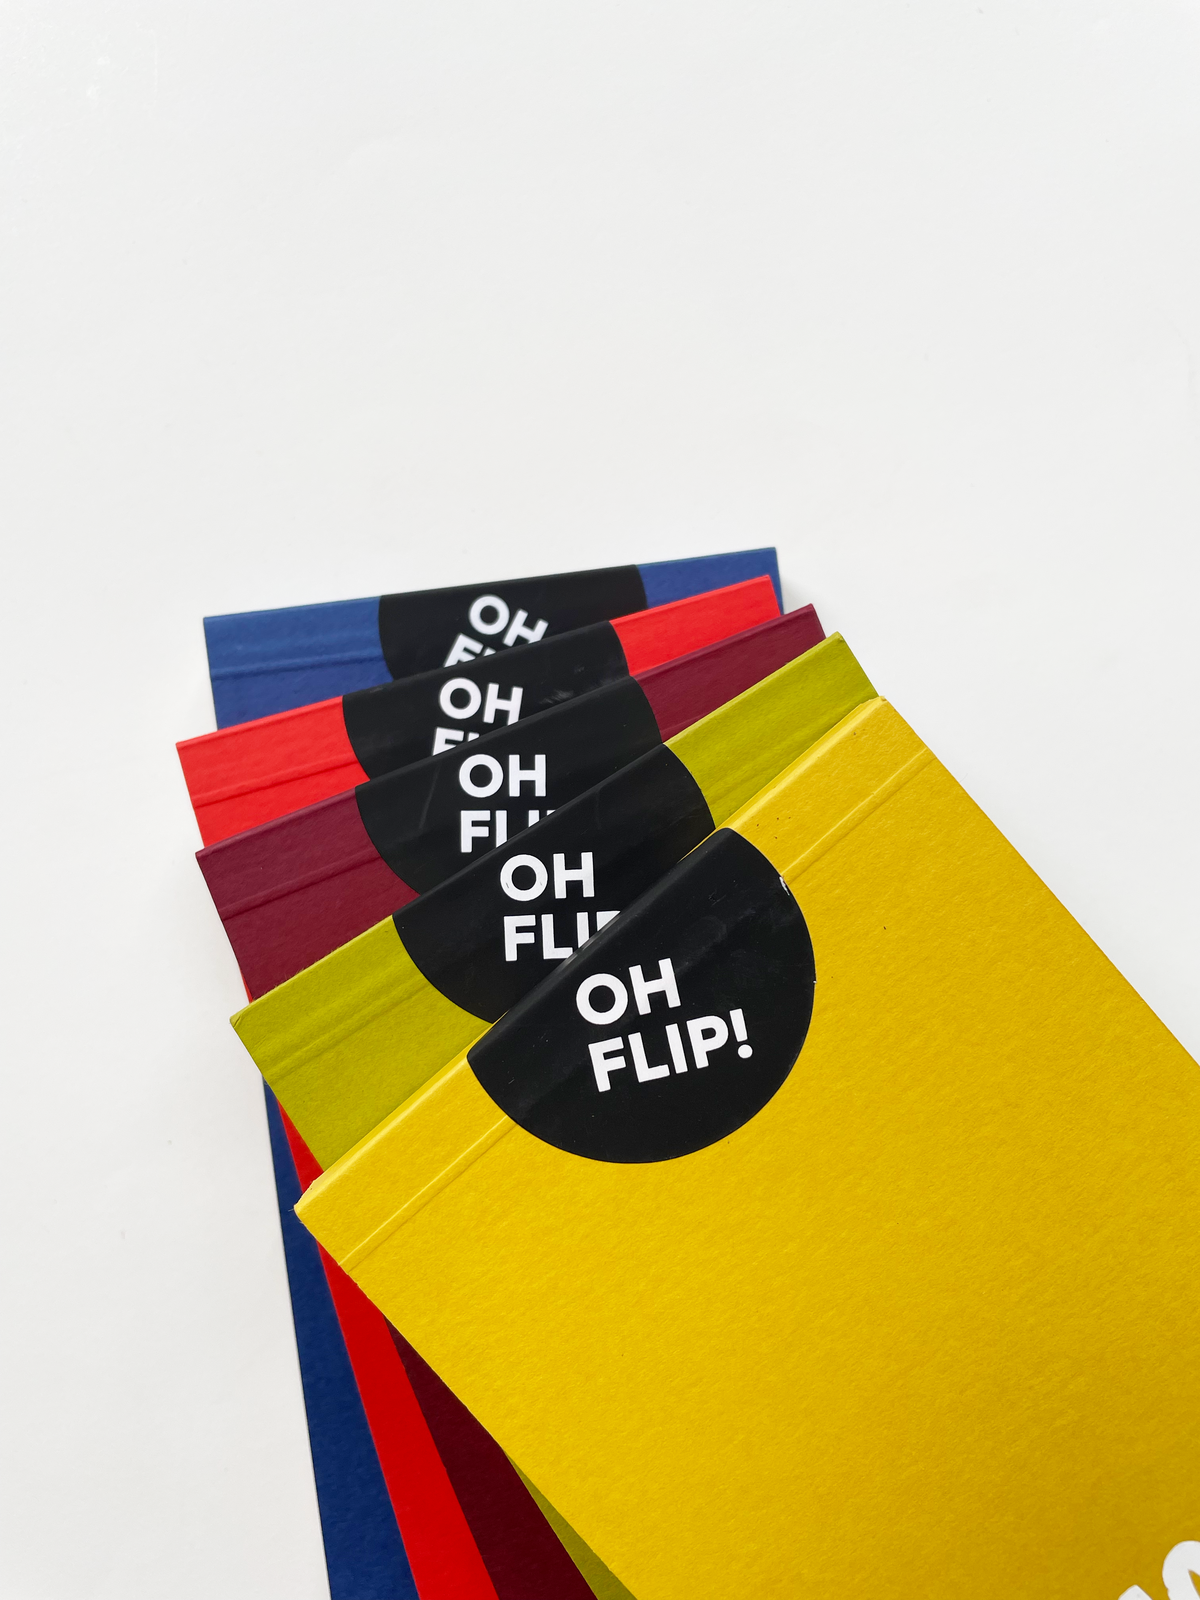  The ‘OH FLIP!’ series